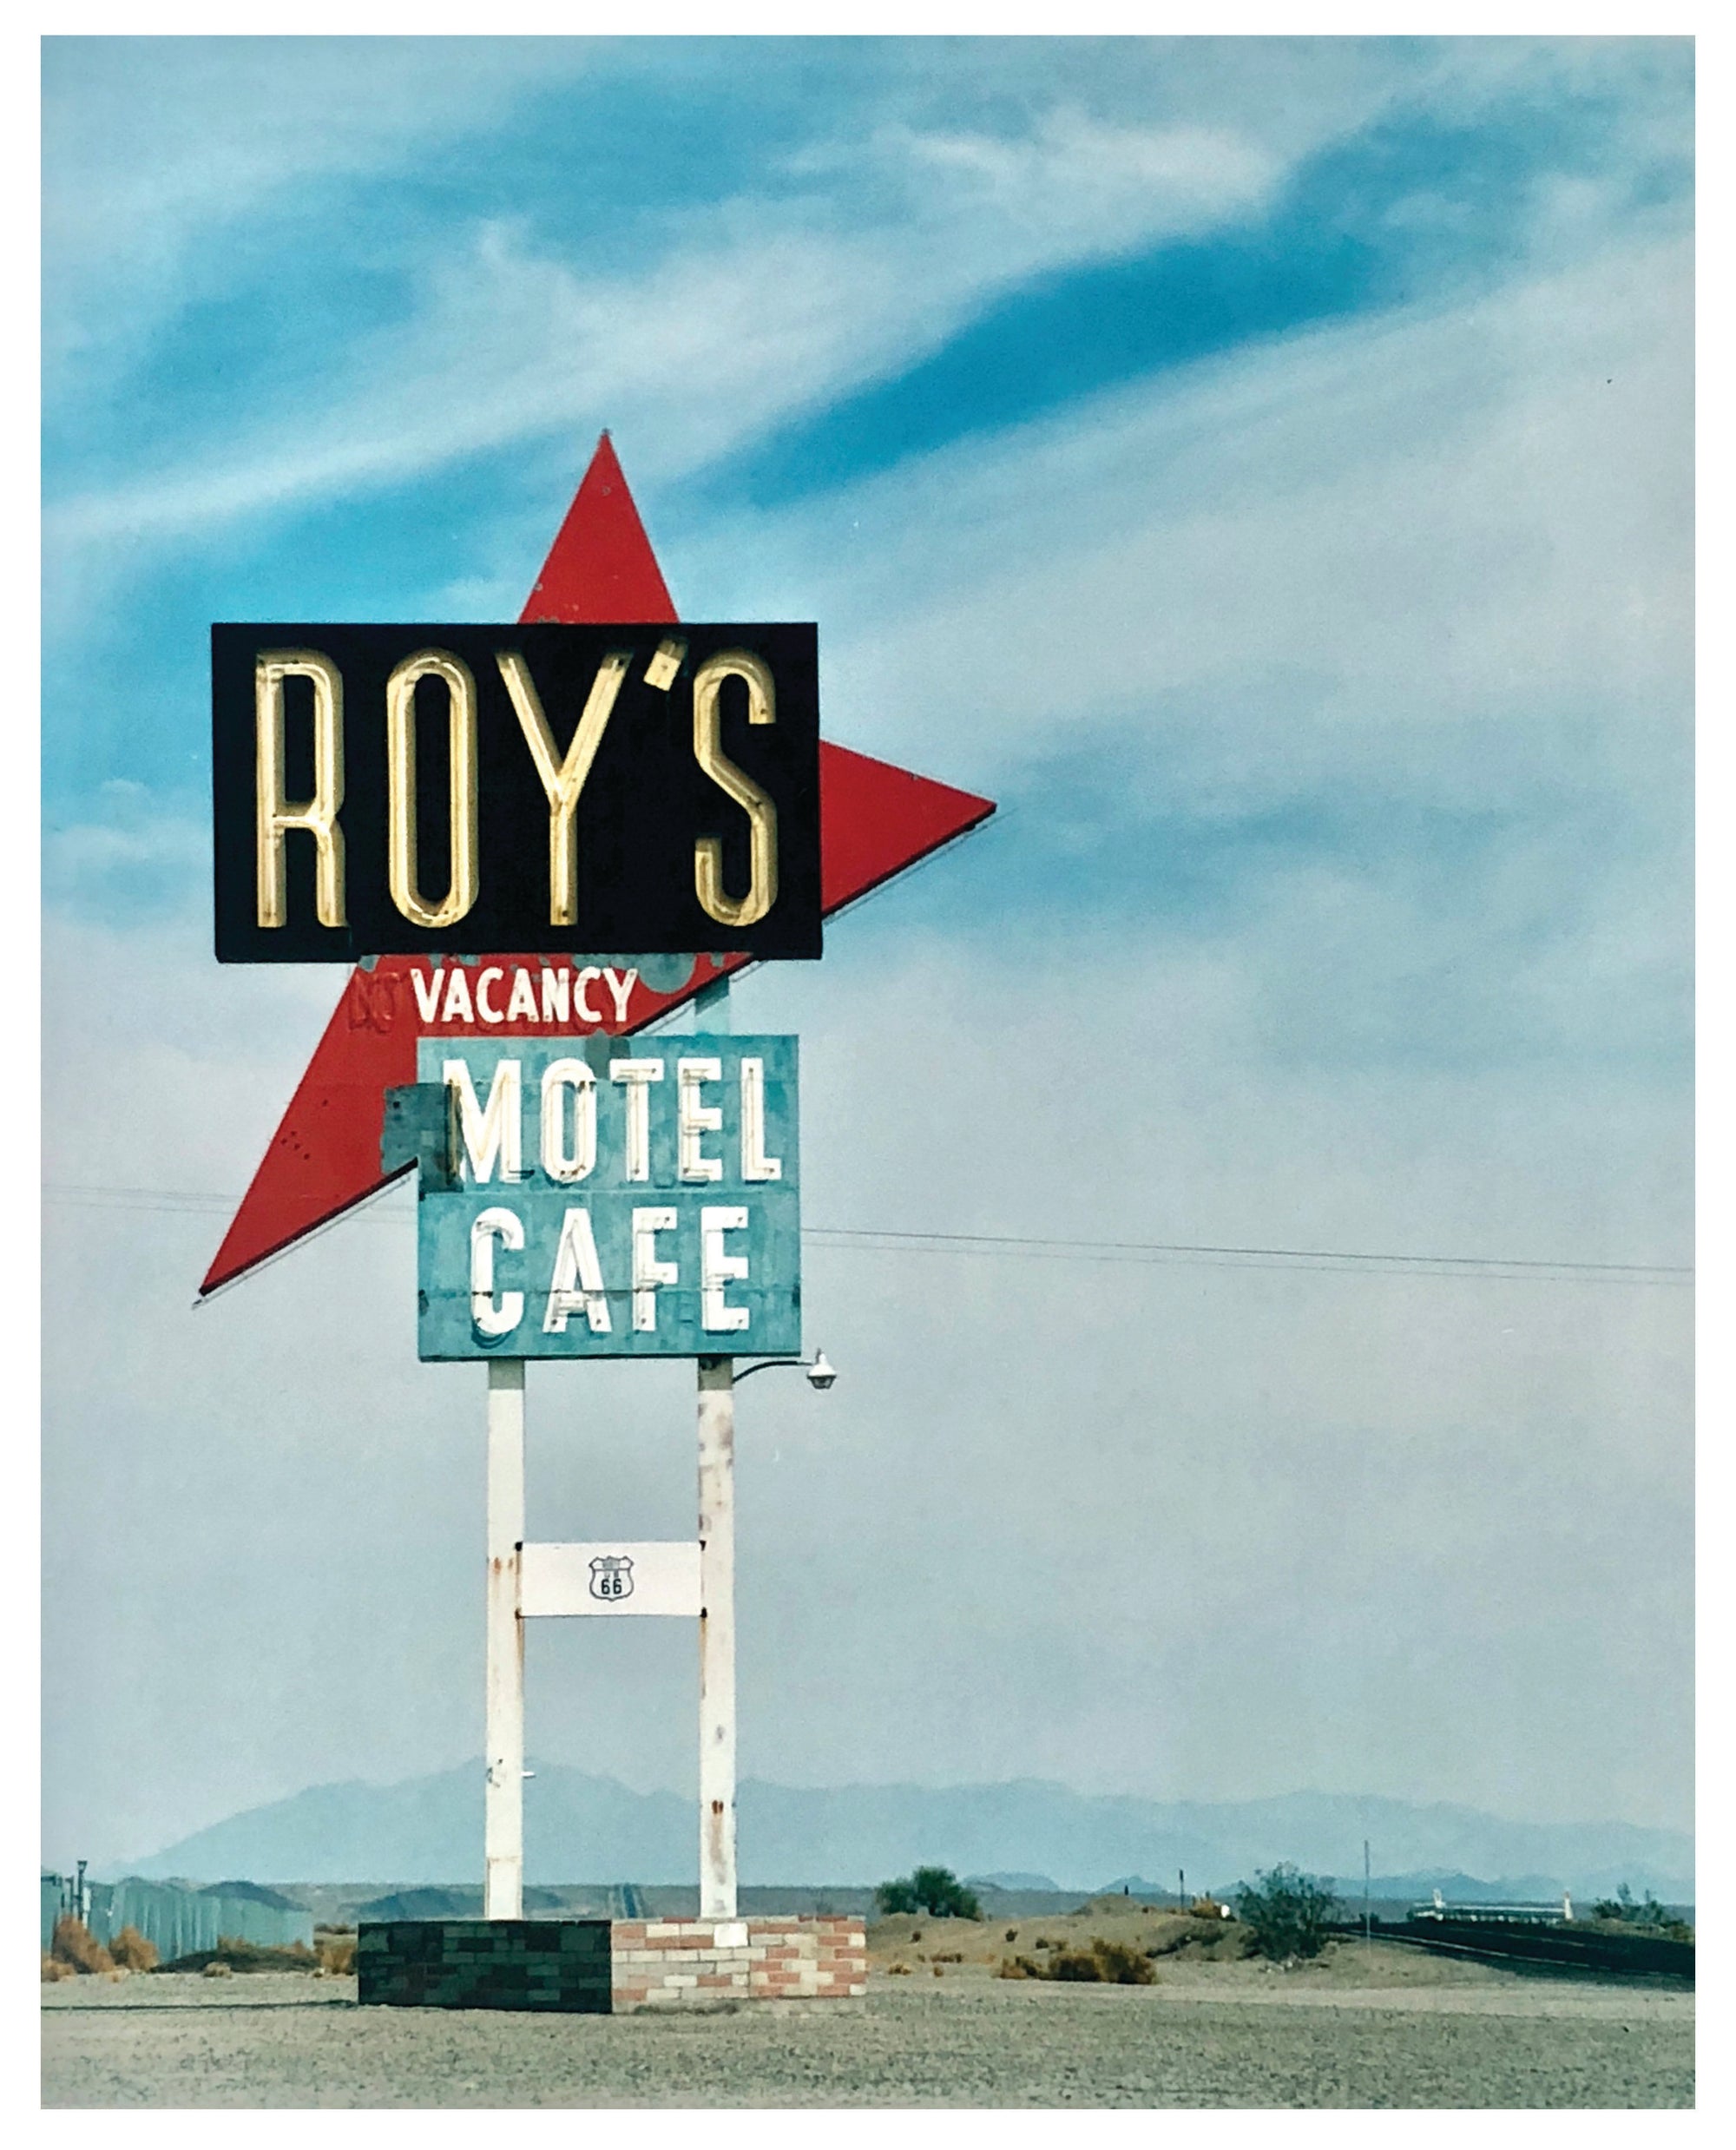 Photograph by Richard Heeps. A roadside sign on Route 66 in America. The word ROY'S appears in a black sign with a big red arrow pointing to the left ground, below this VACANCY and on a green square the words MOTEL and CAFE.